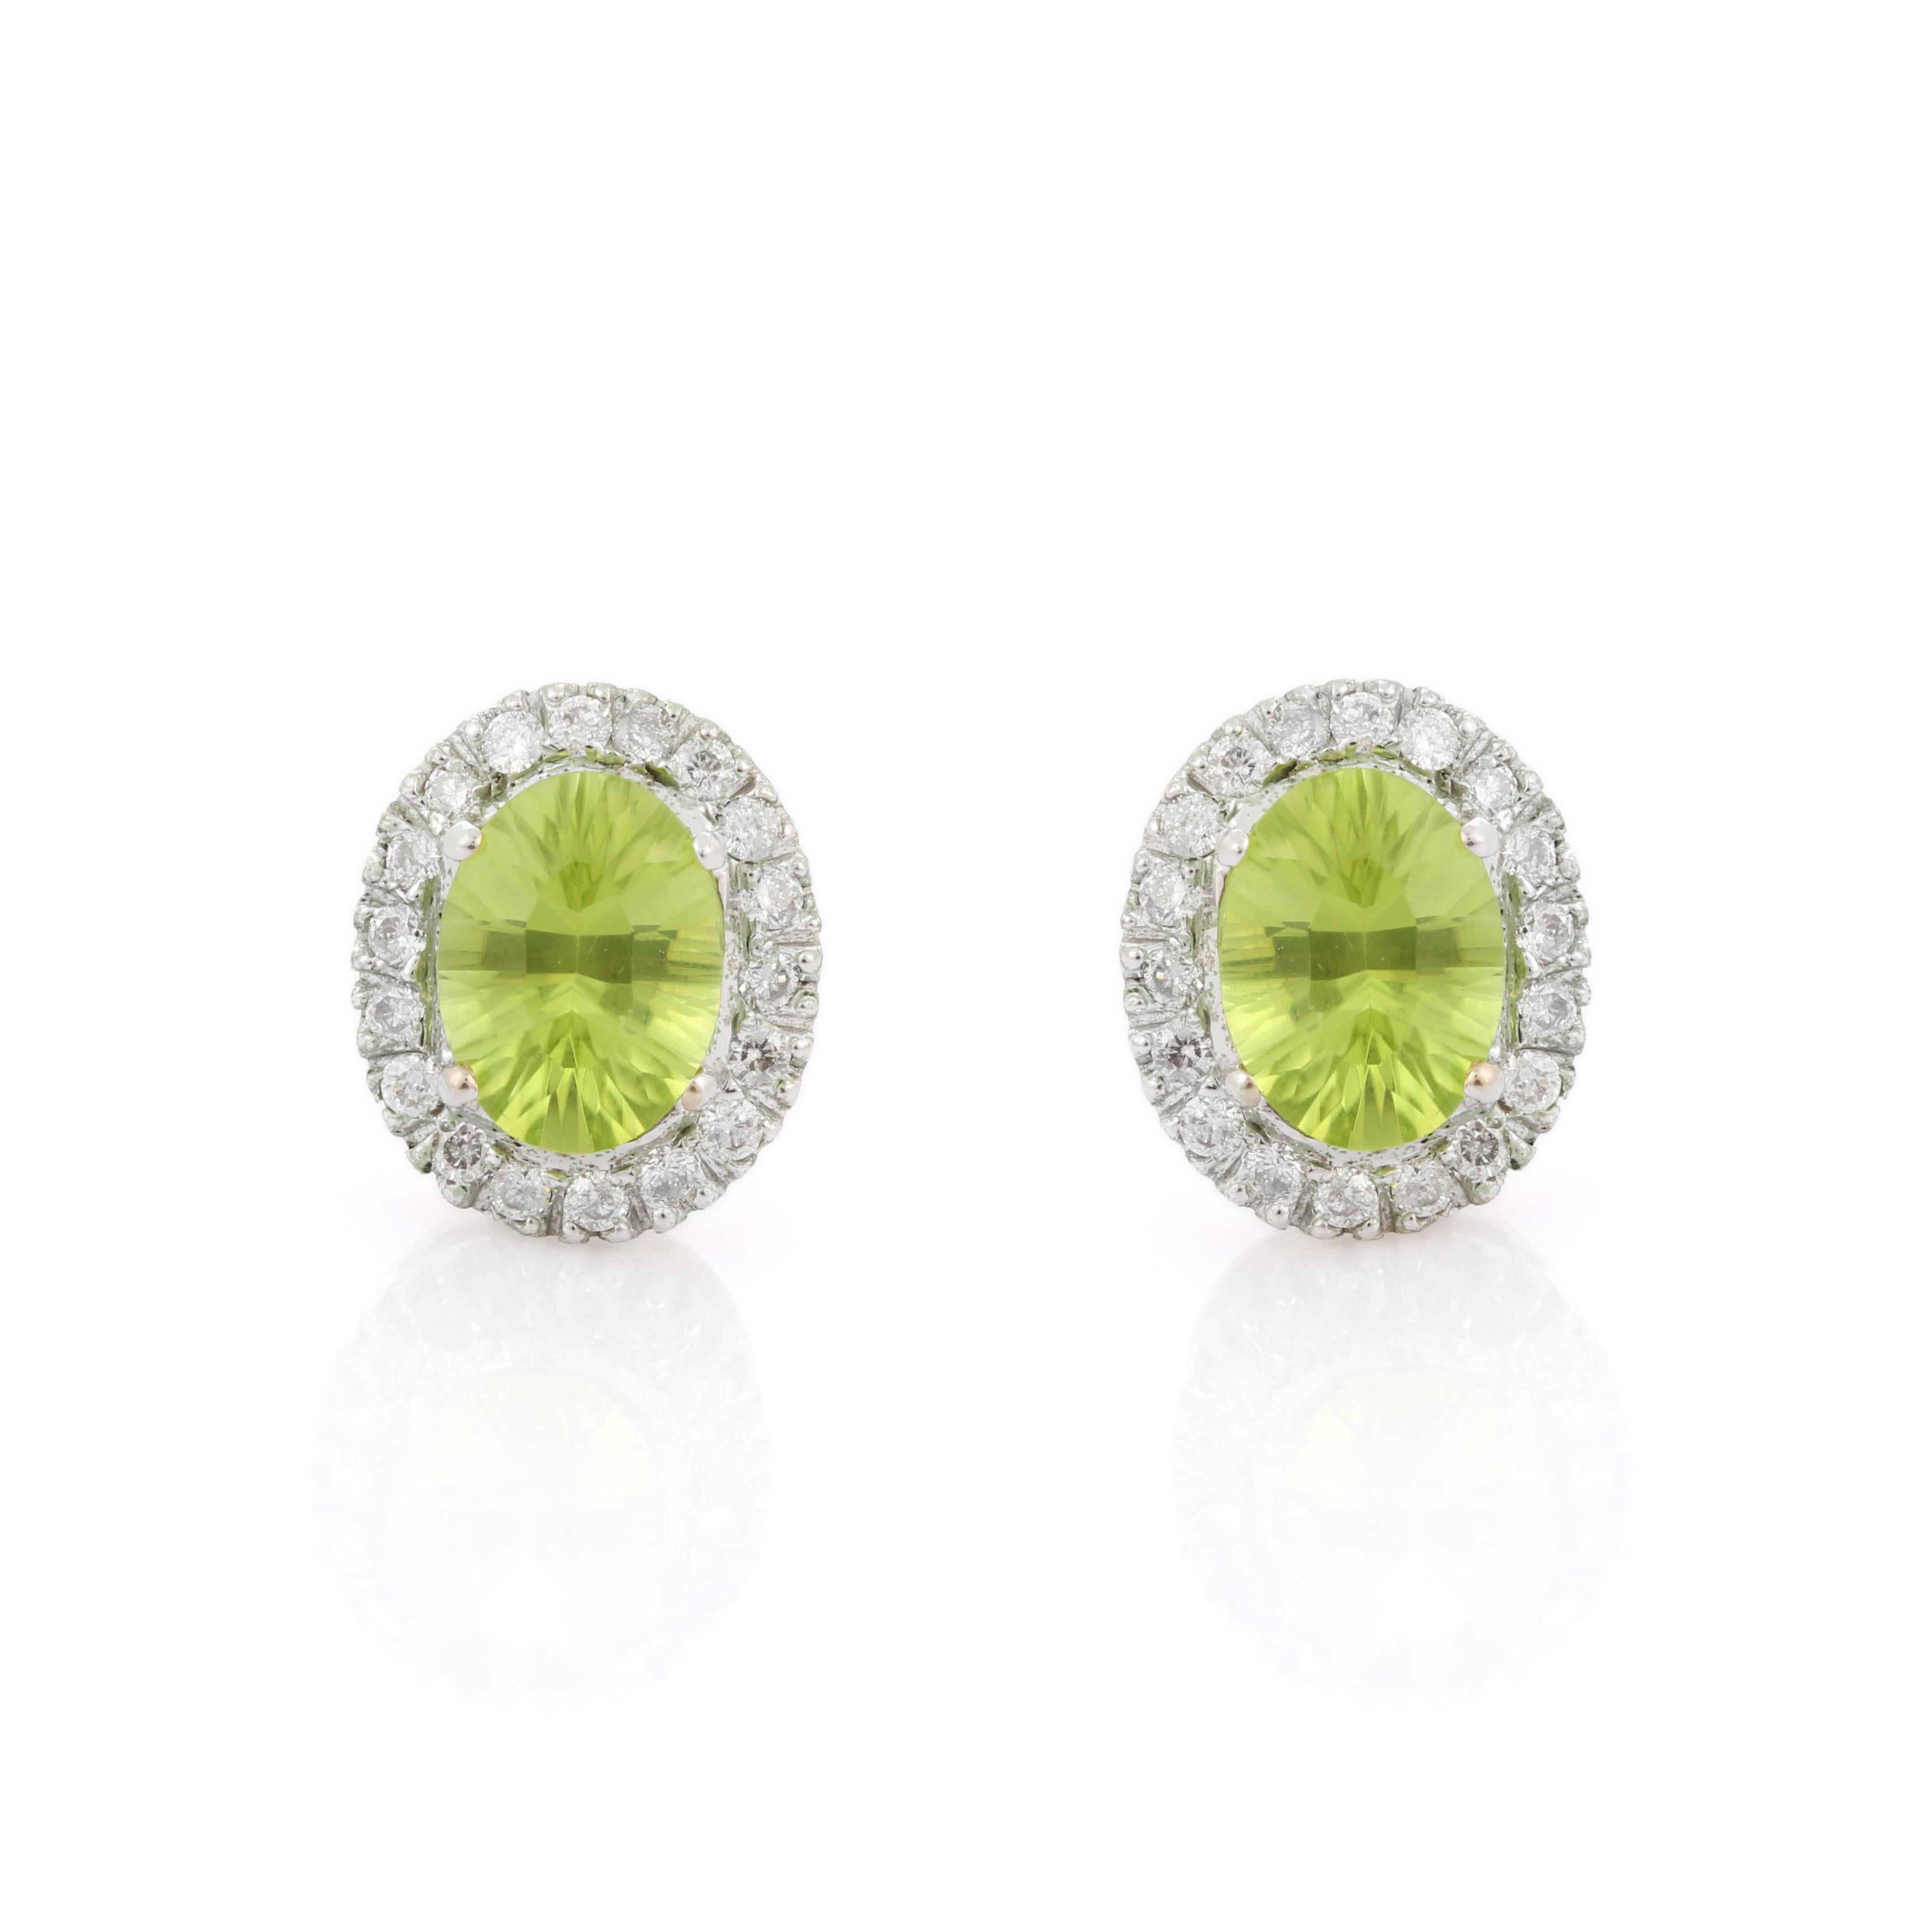 2.34 Ct Peridot with Halo Diamond Stud Earrings in 18K White Gold In New Condition For Sale In Houston, TX